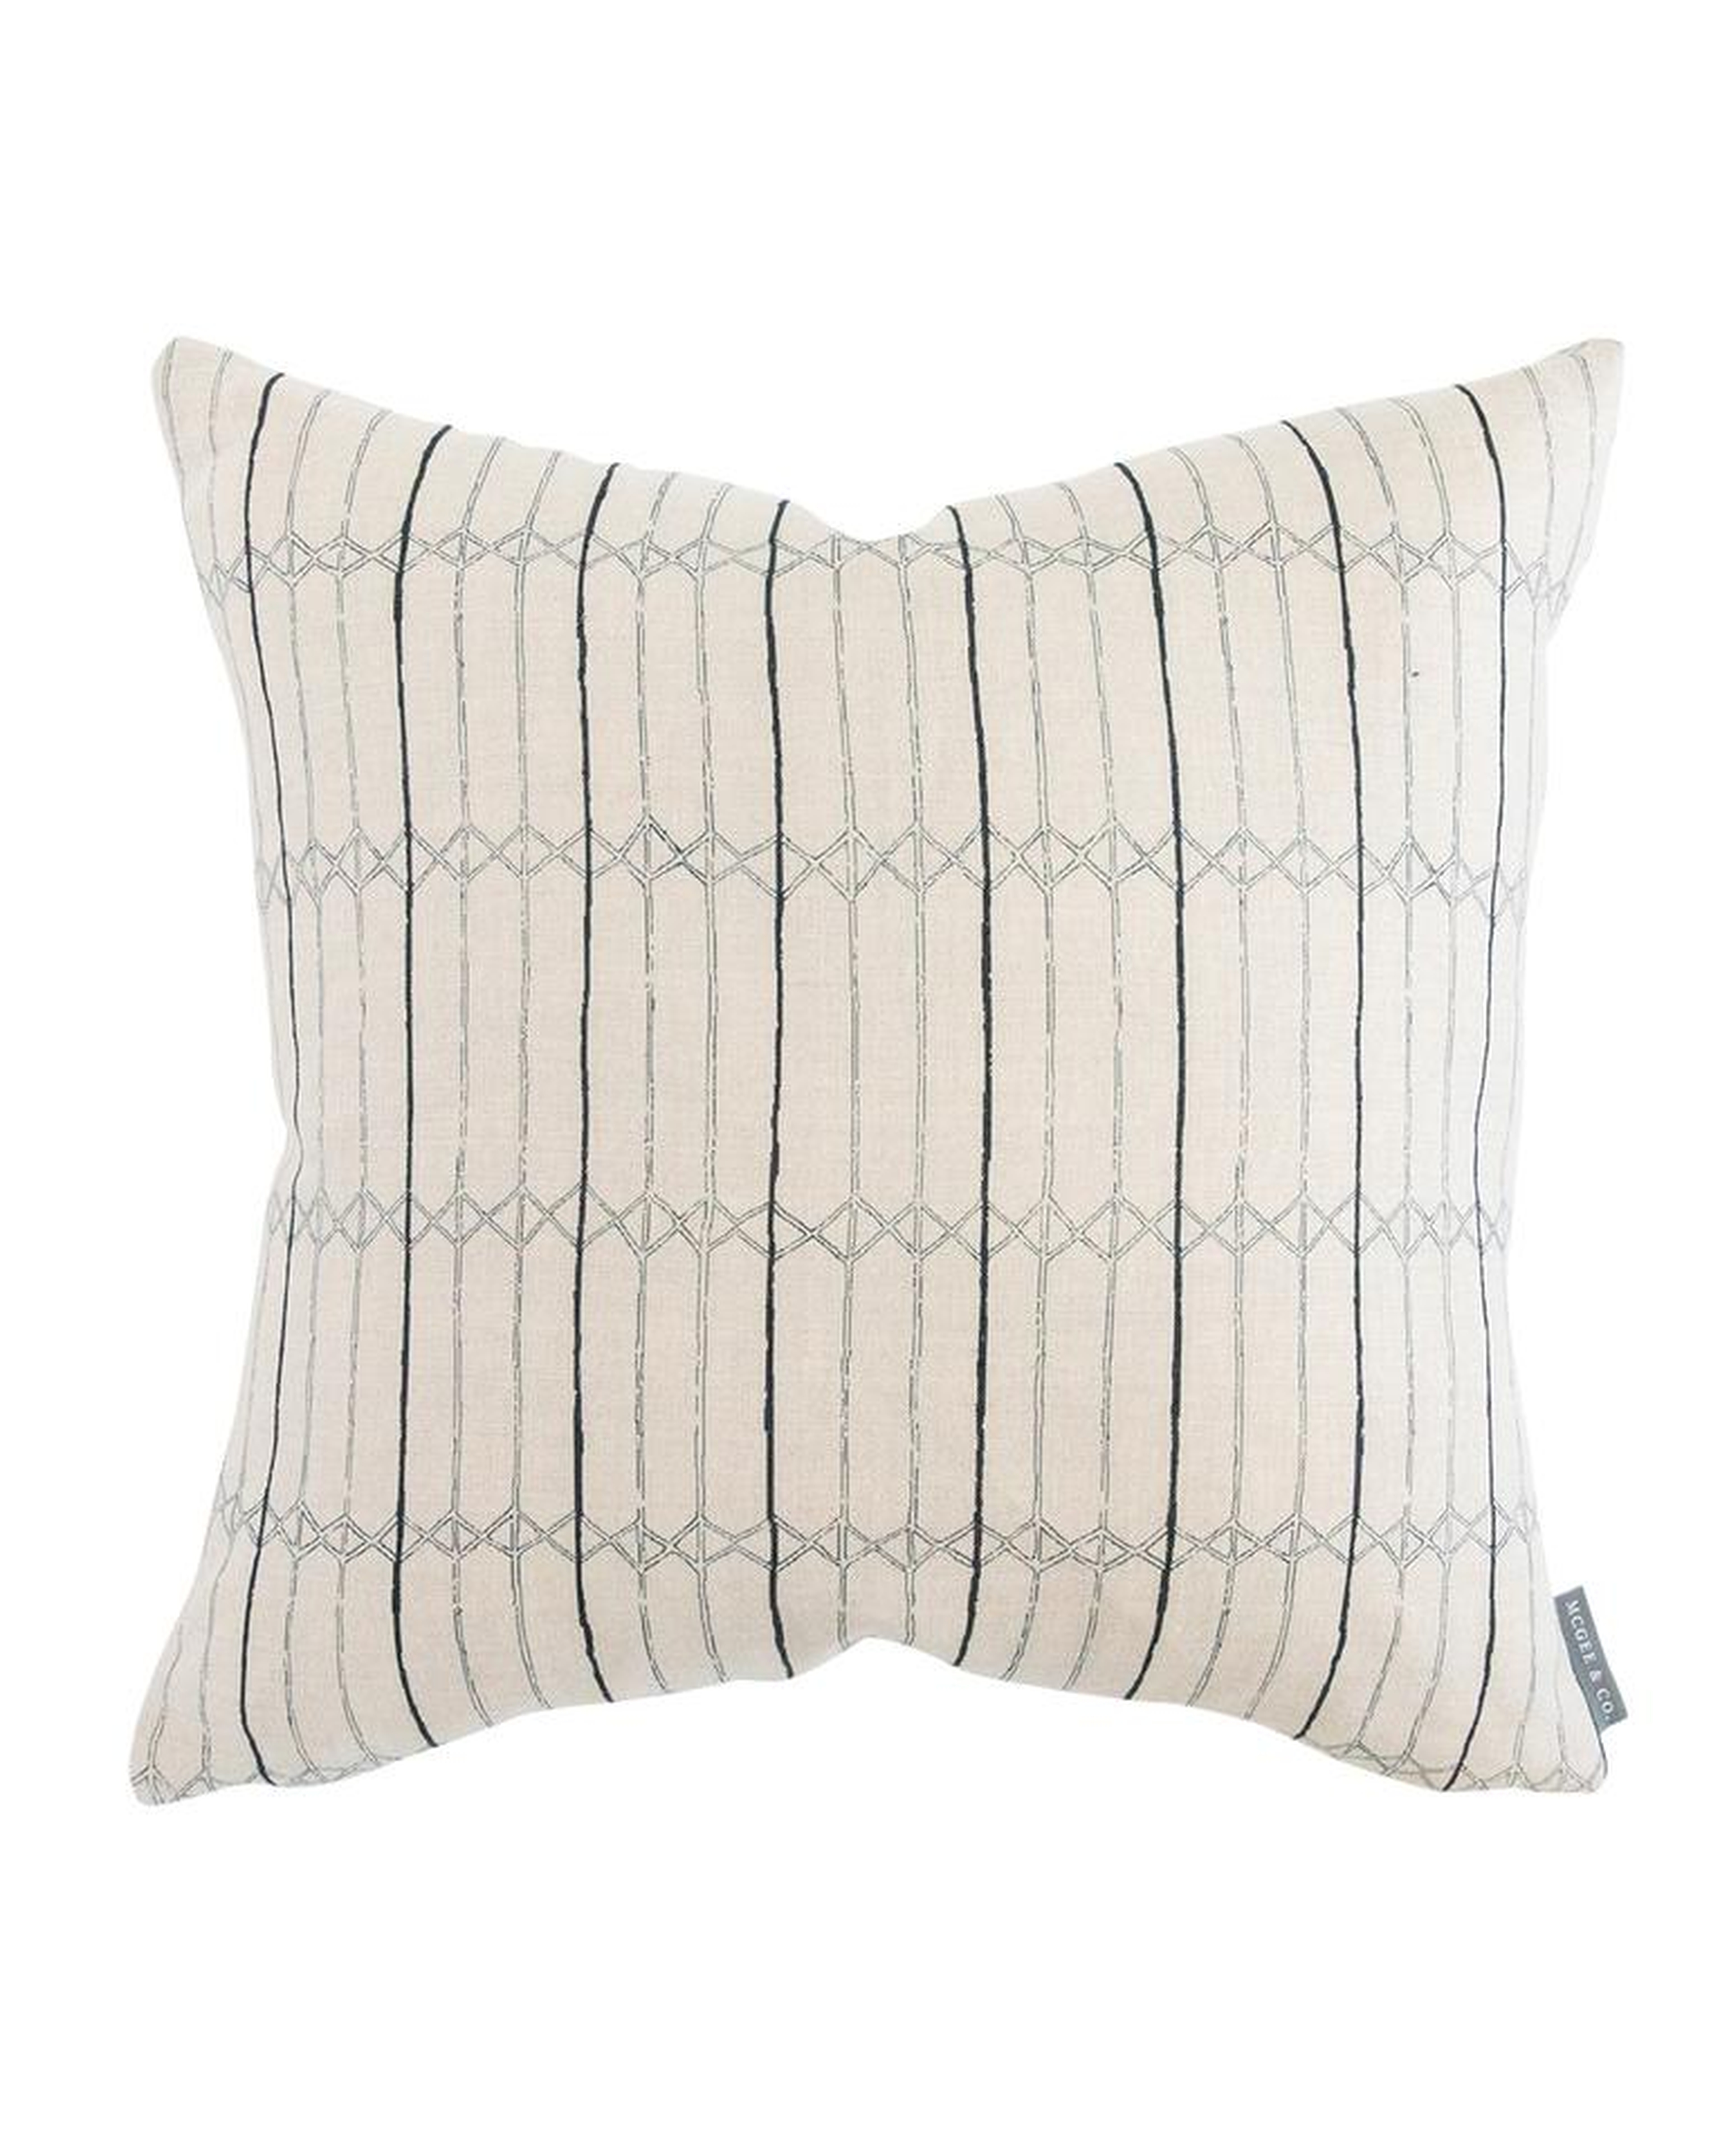 Minerva Pillow Cover, 20" x 20" - McGee & Co.